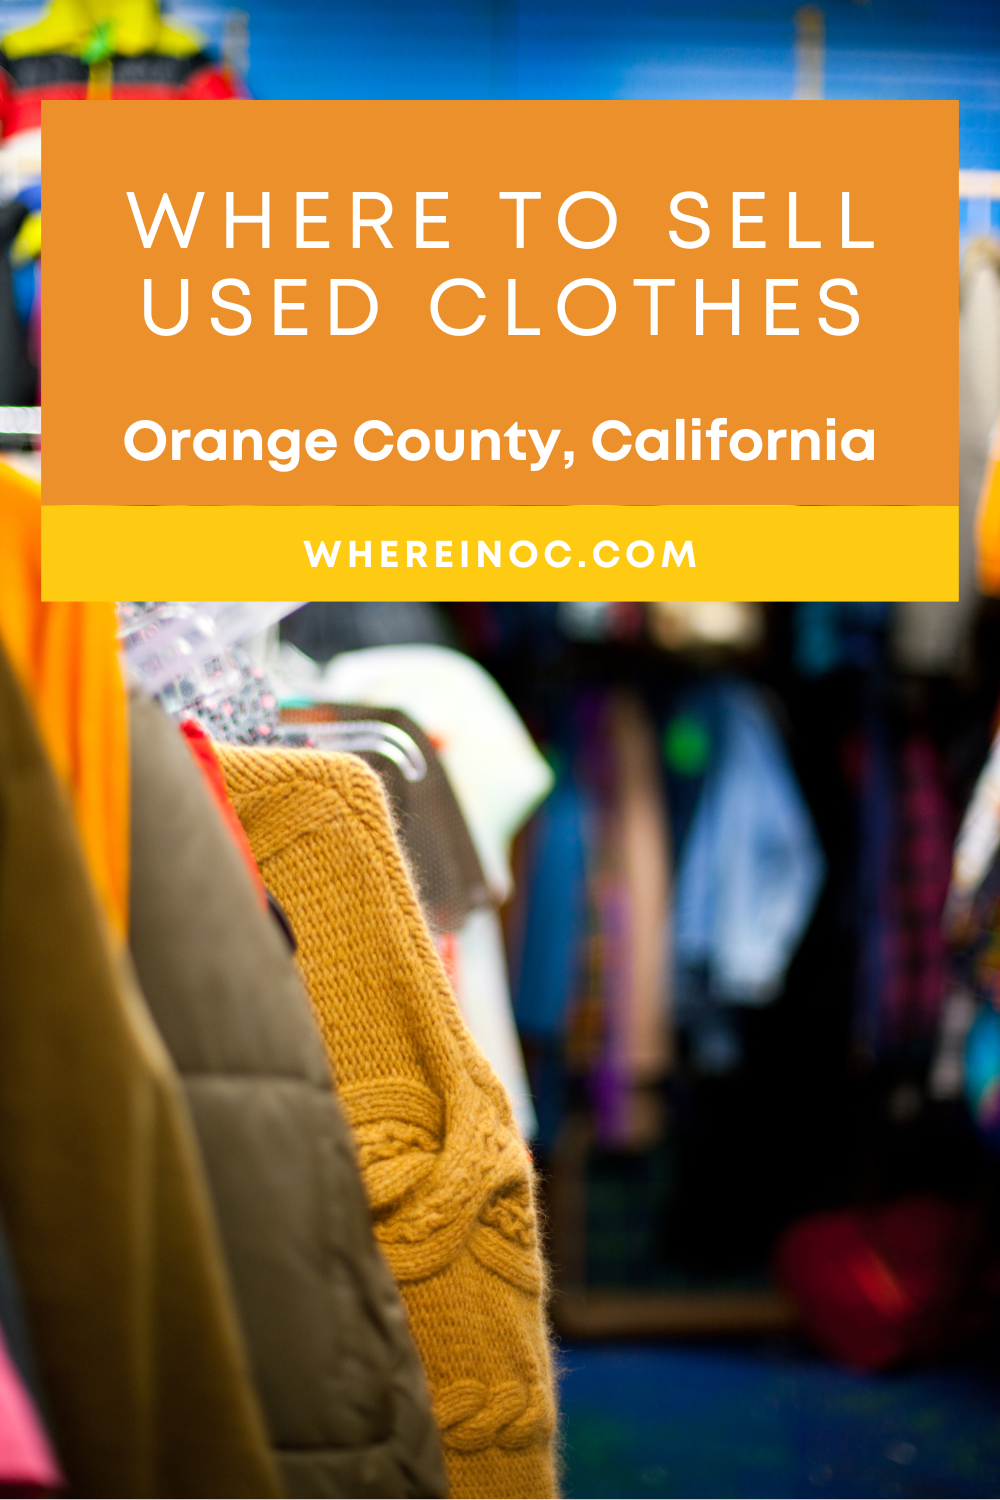 Where to Sell Used Clothes in Orange County - Where in OC